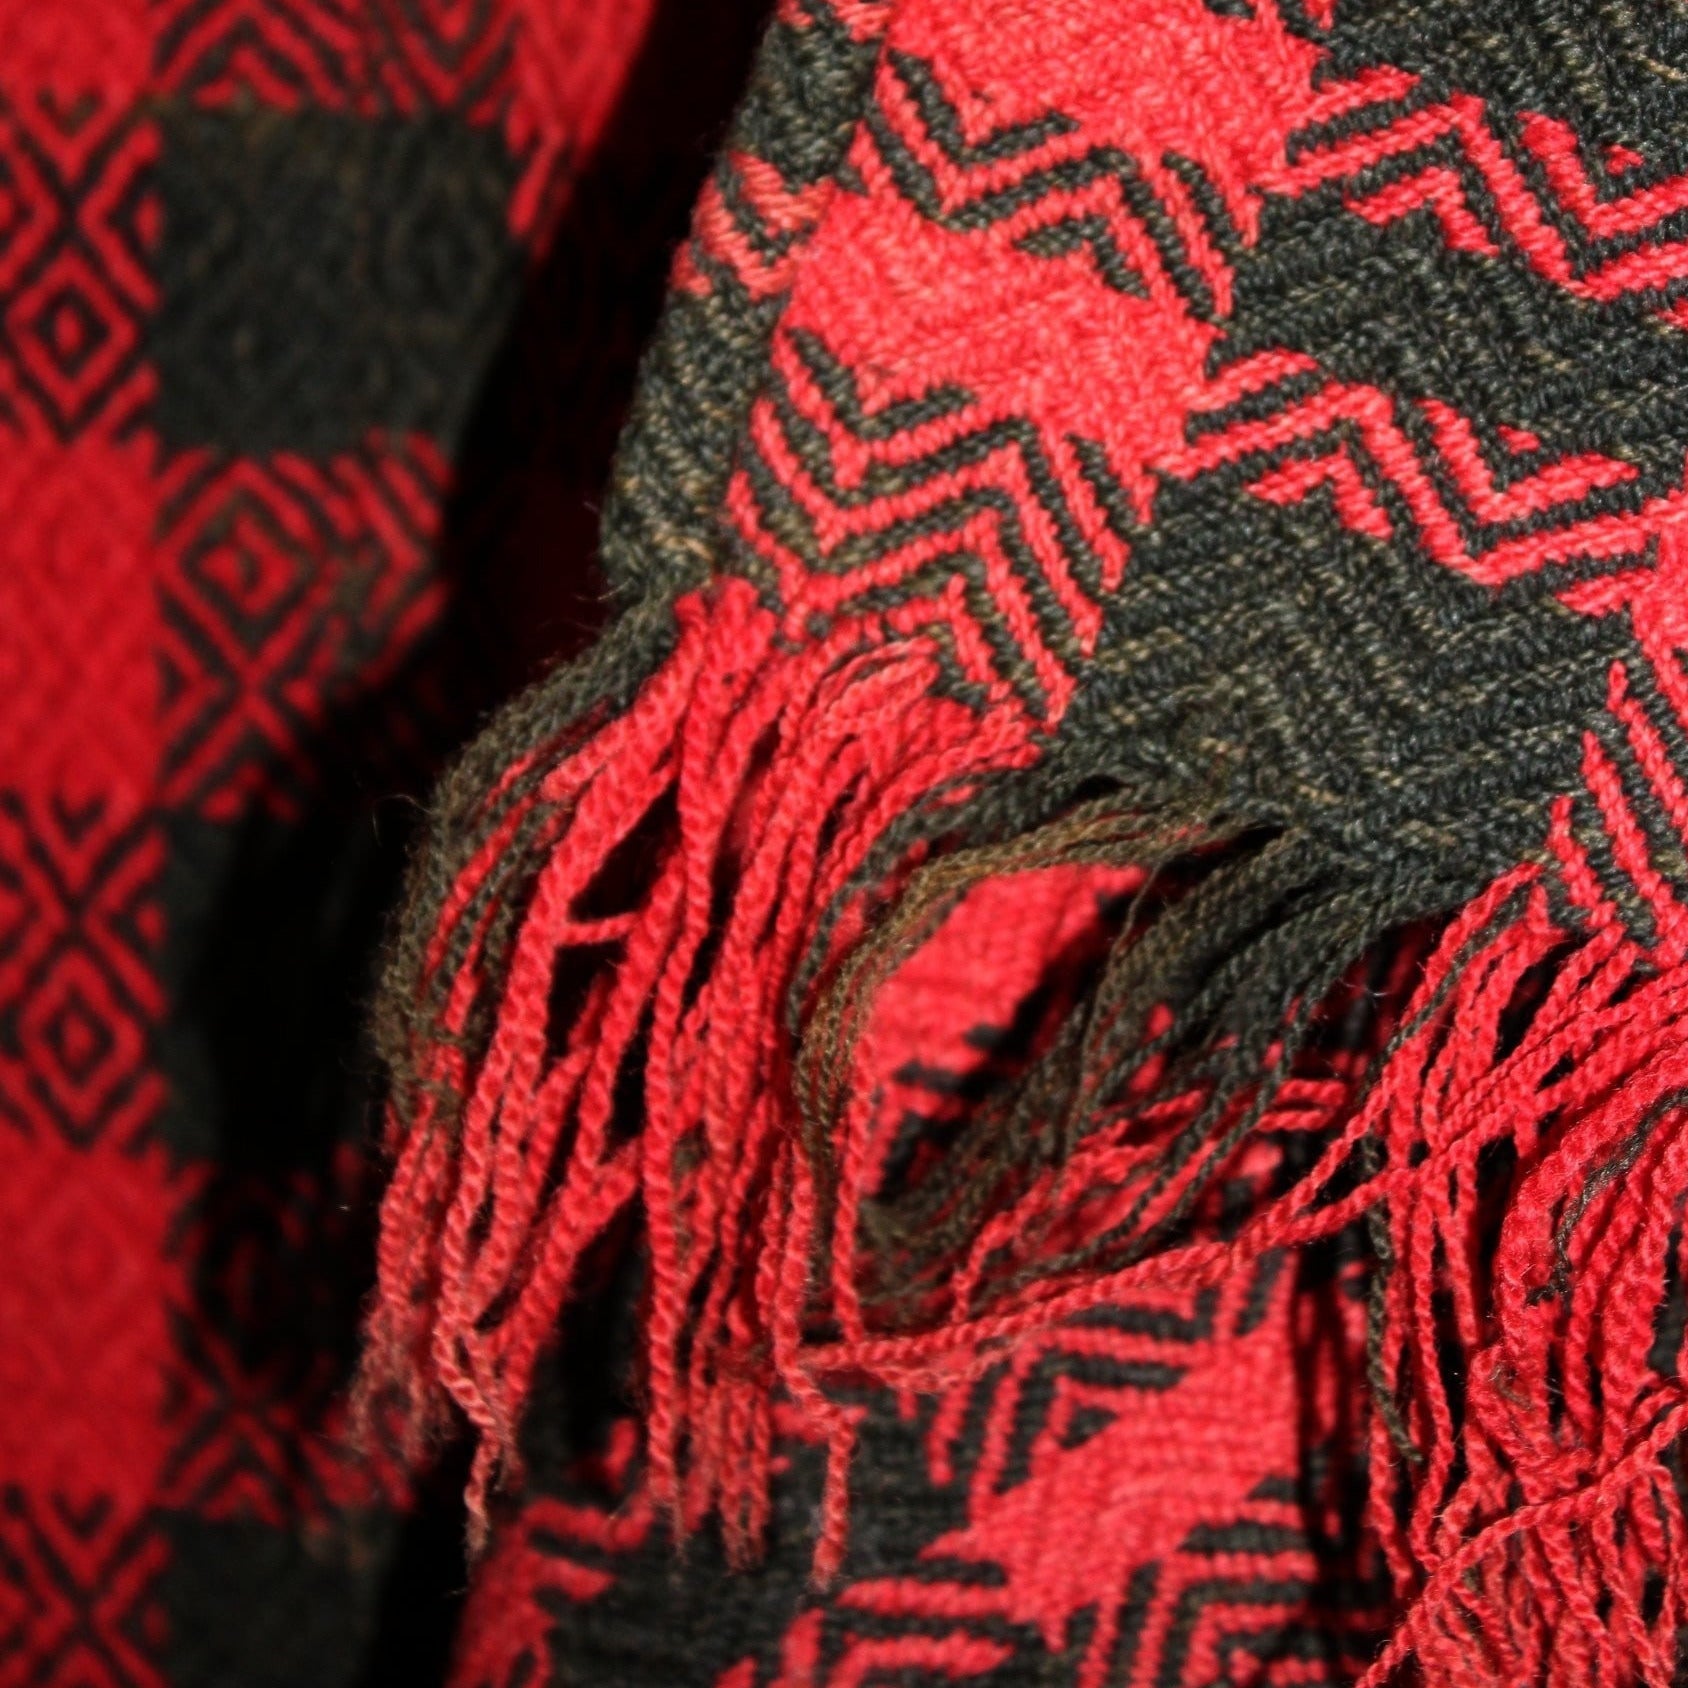 Antique Wool Woven Coverlet Blanket 1800s Red Black Intricate Checkerboard Geometric 66" X 92" rare red